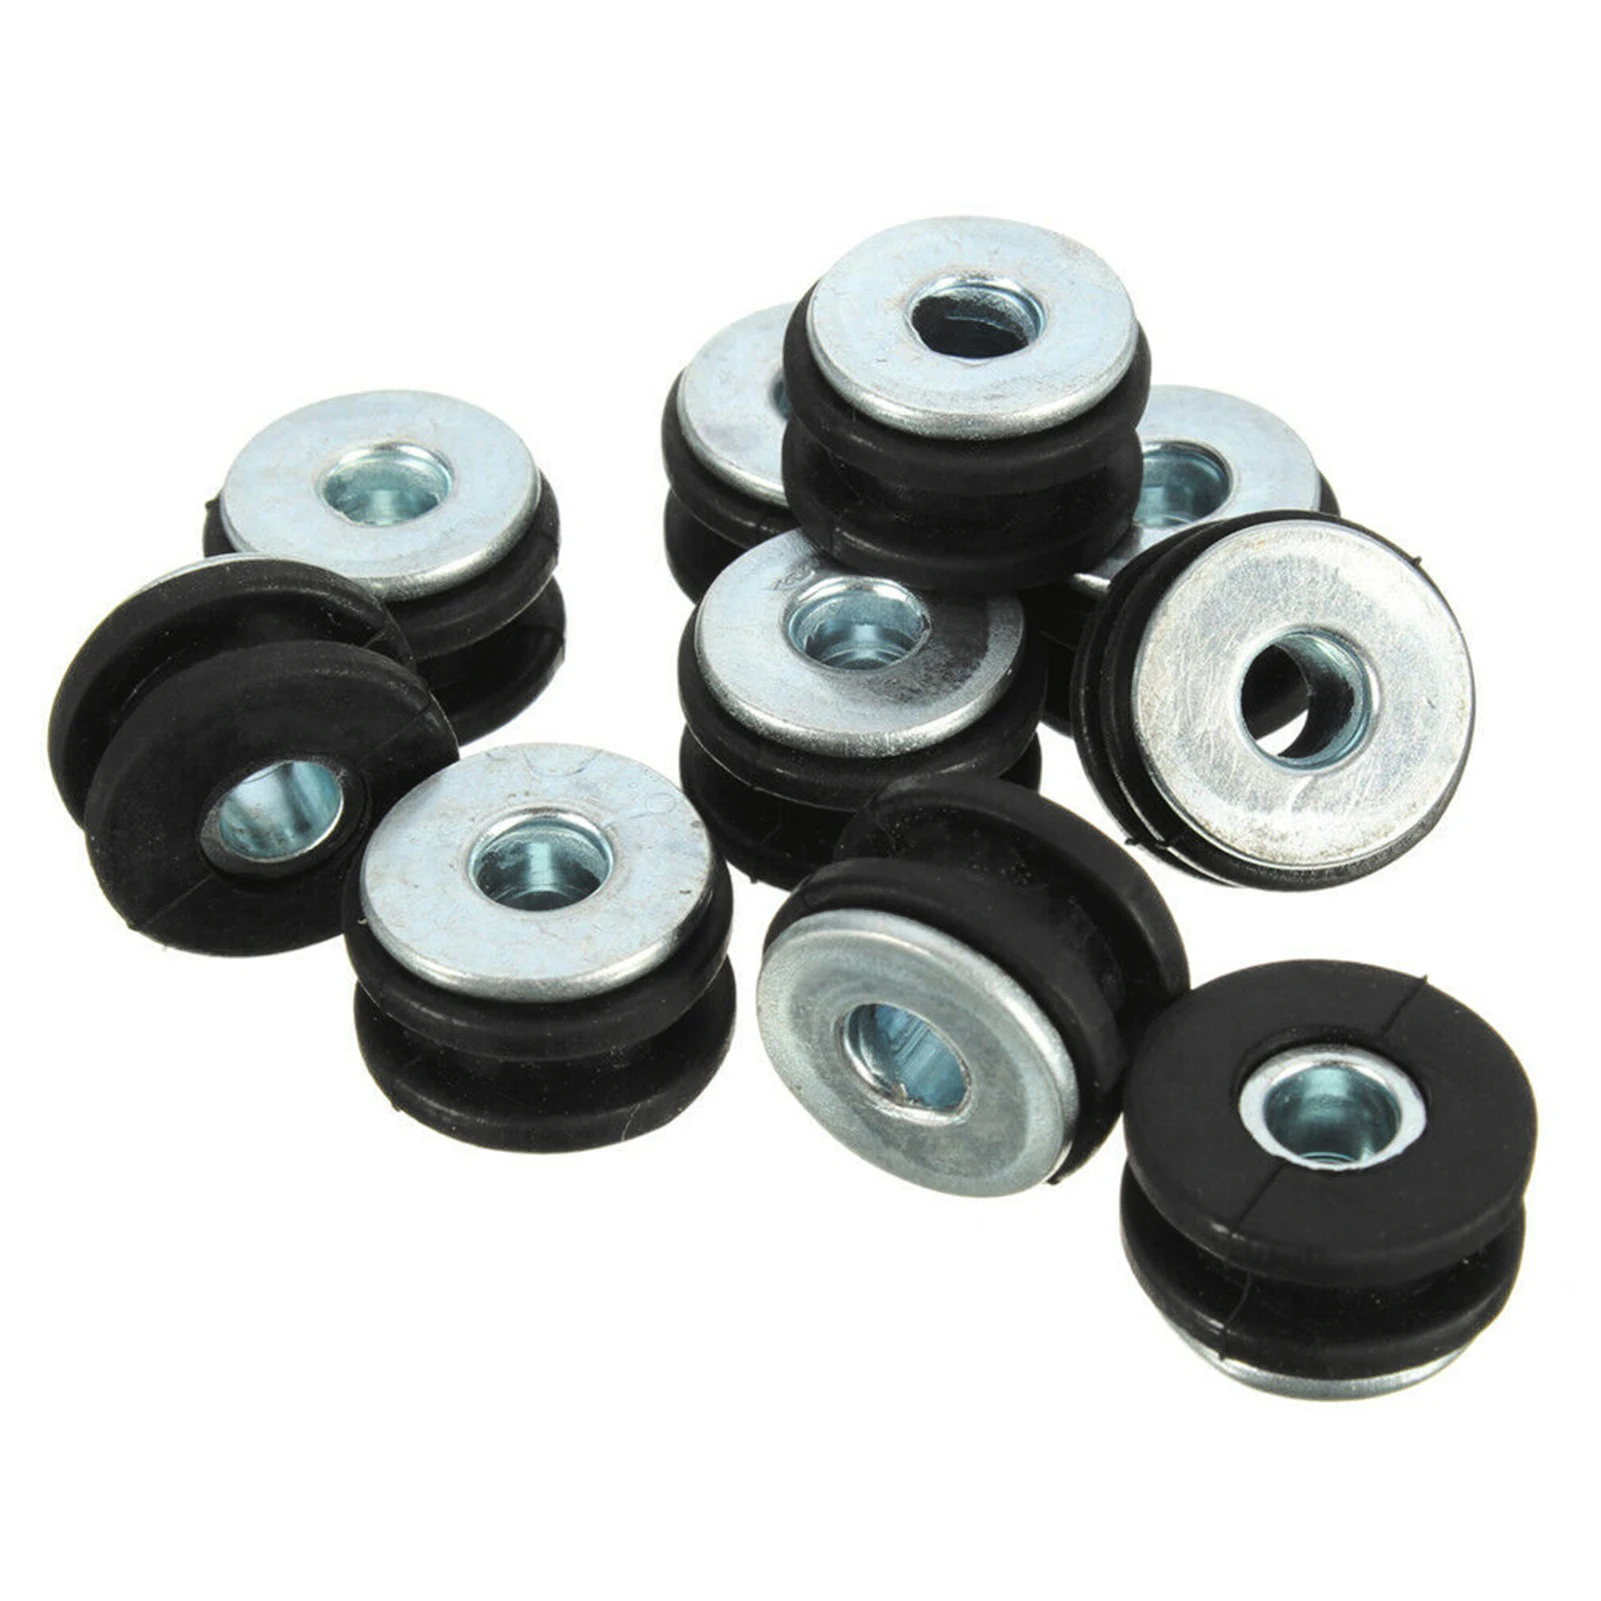 

10x Motorcycle Rubber Grommets Bolts For Honda For Y.amaha For Suzuki For Fairing Rubber Grommets Kit Washer Assortment